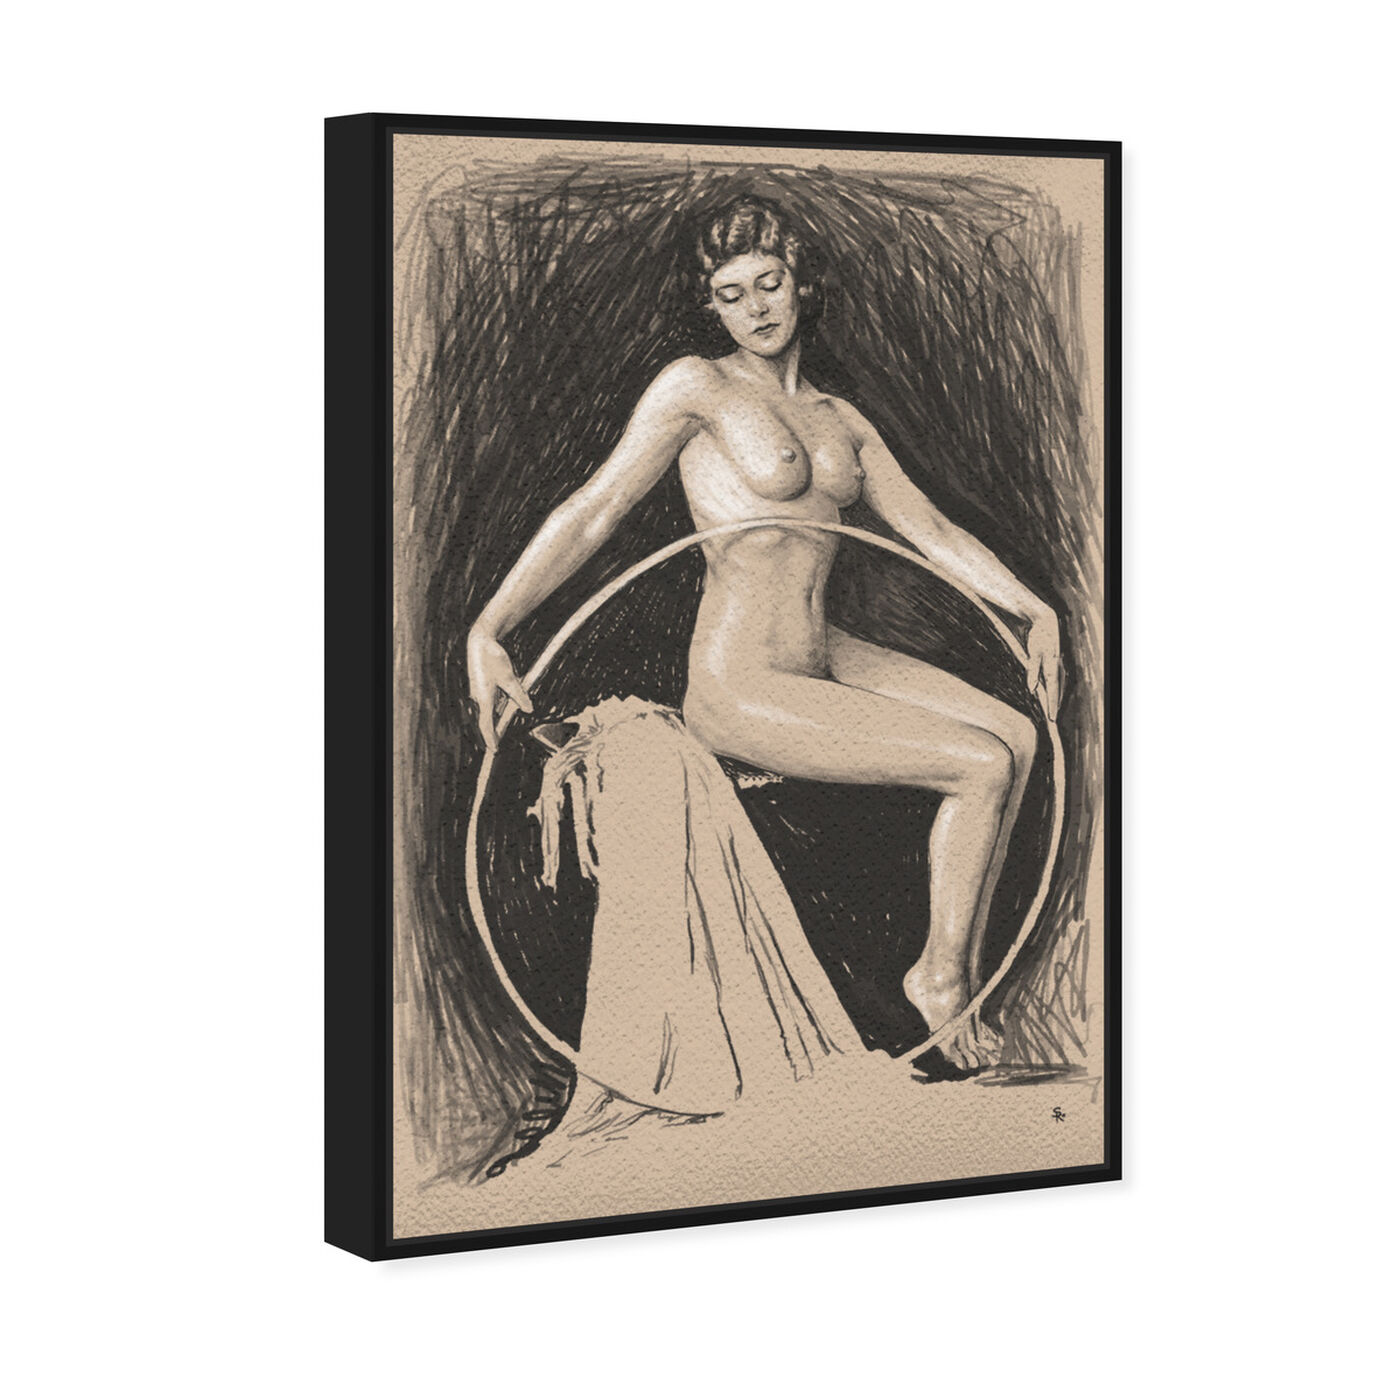 Angled view of Nude Woman with Hoop featuring classic and figurative and nudes art.